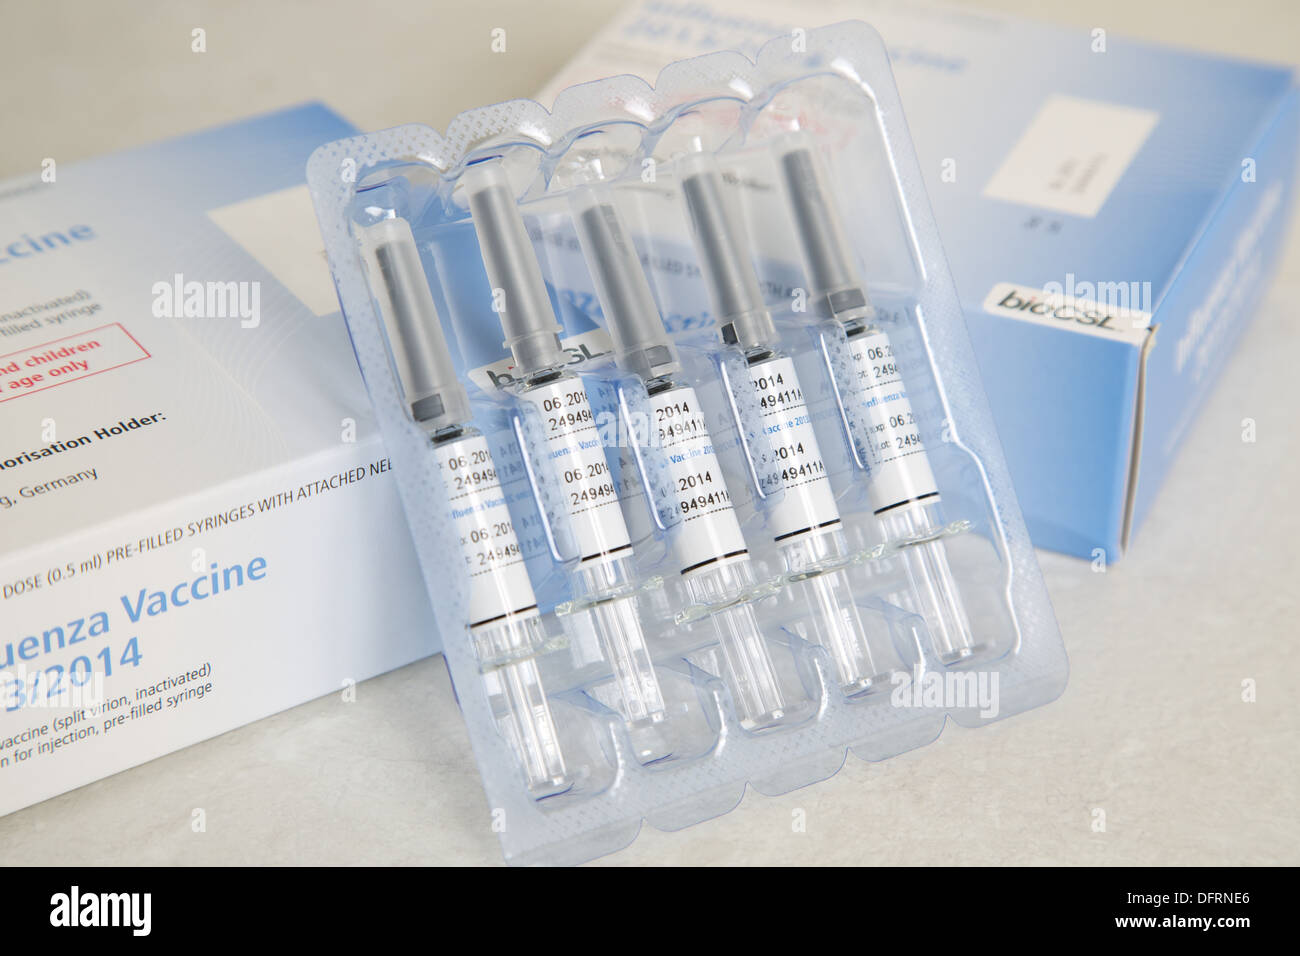 Flu vaccine 2013/2014 packaging packs and syringes for winter flu jab innoculation Stock Photo